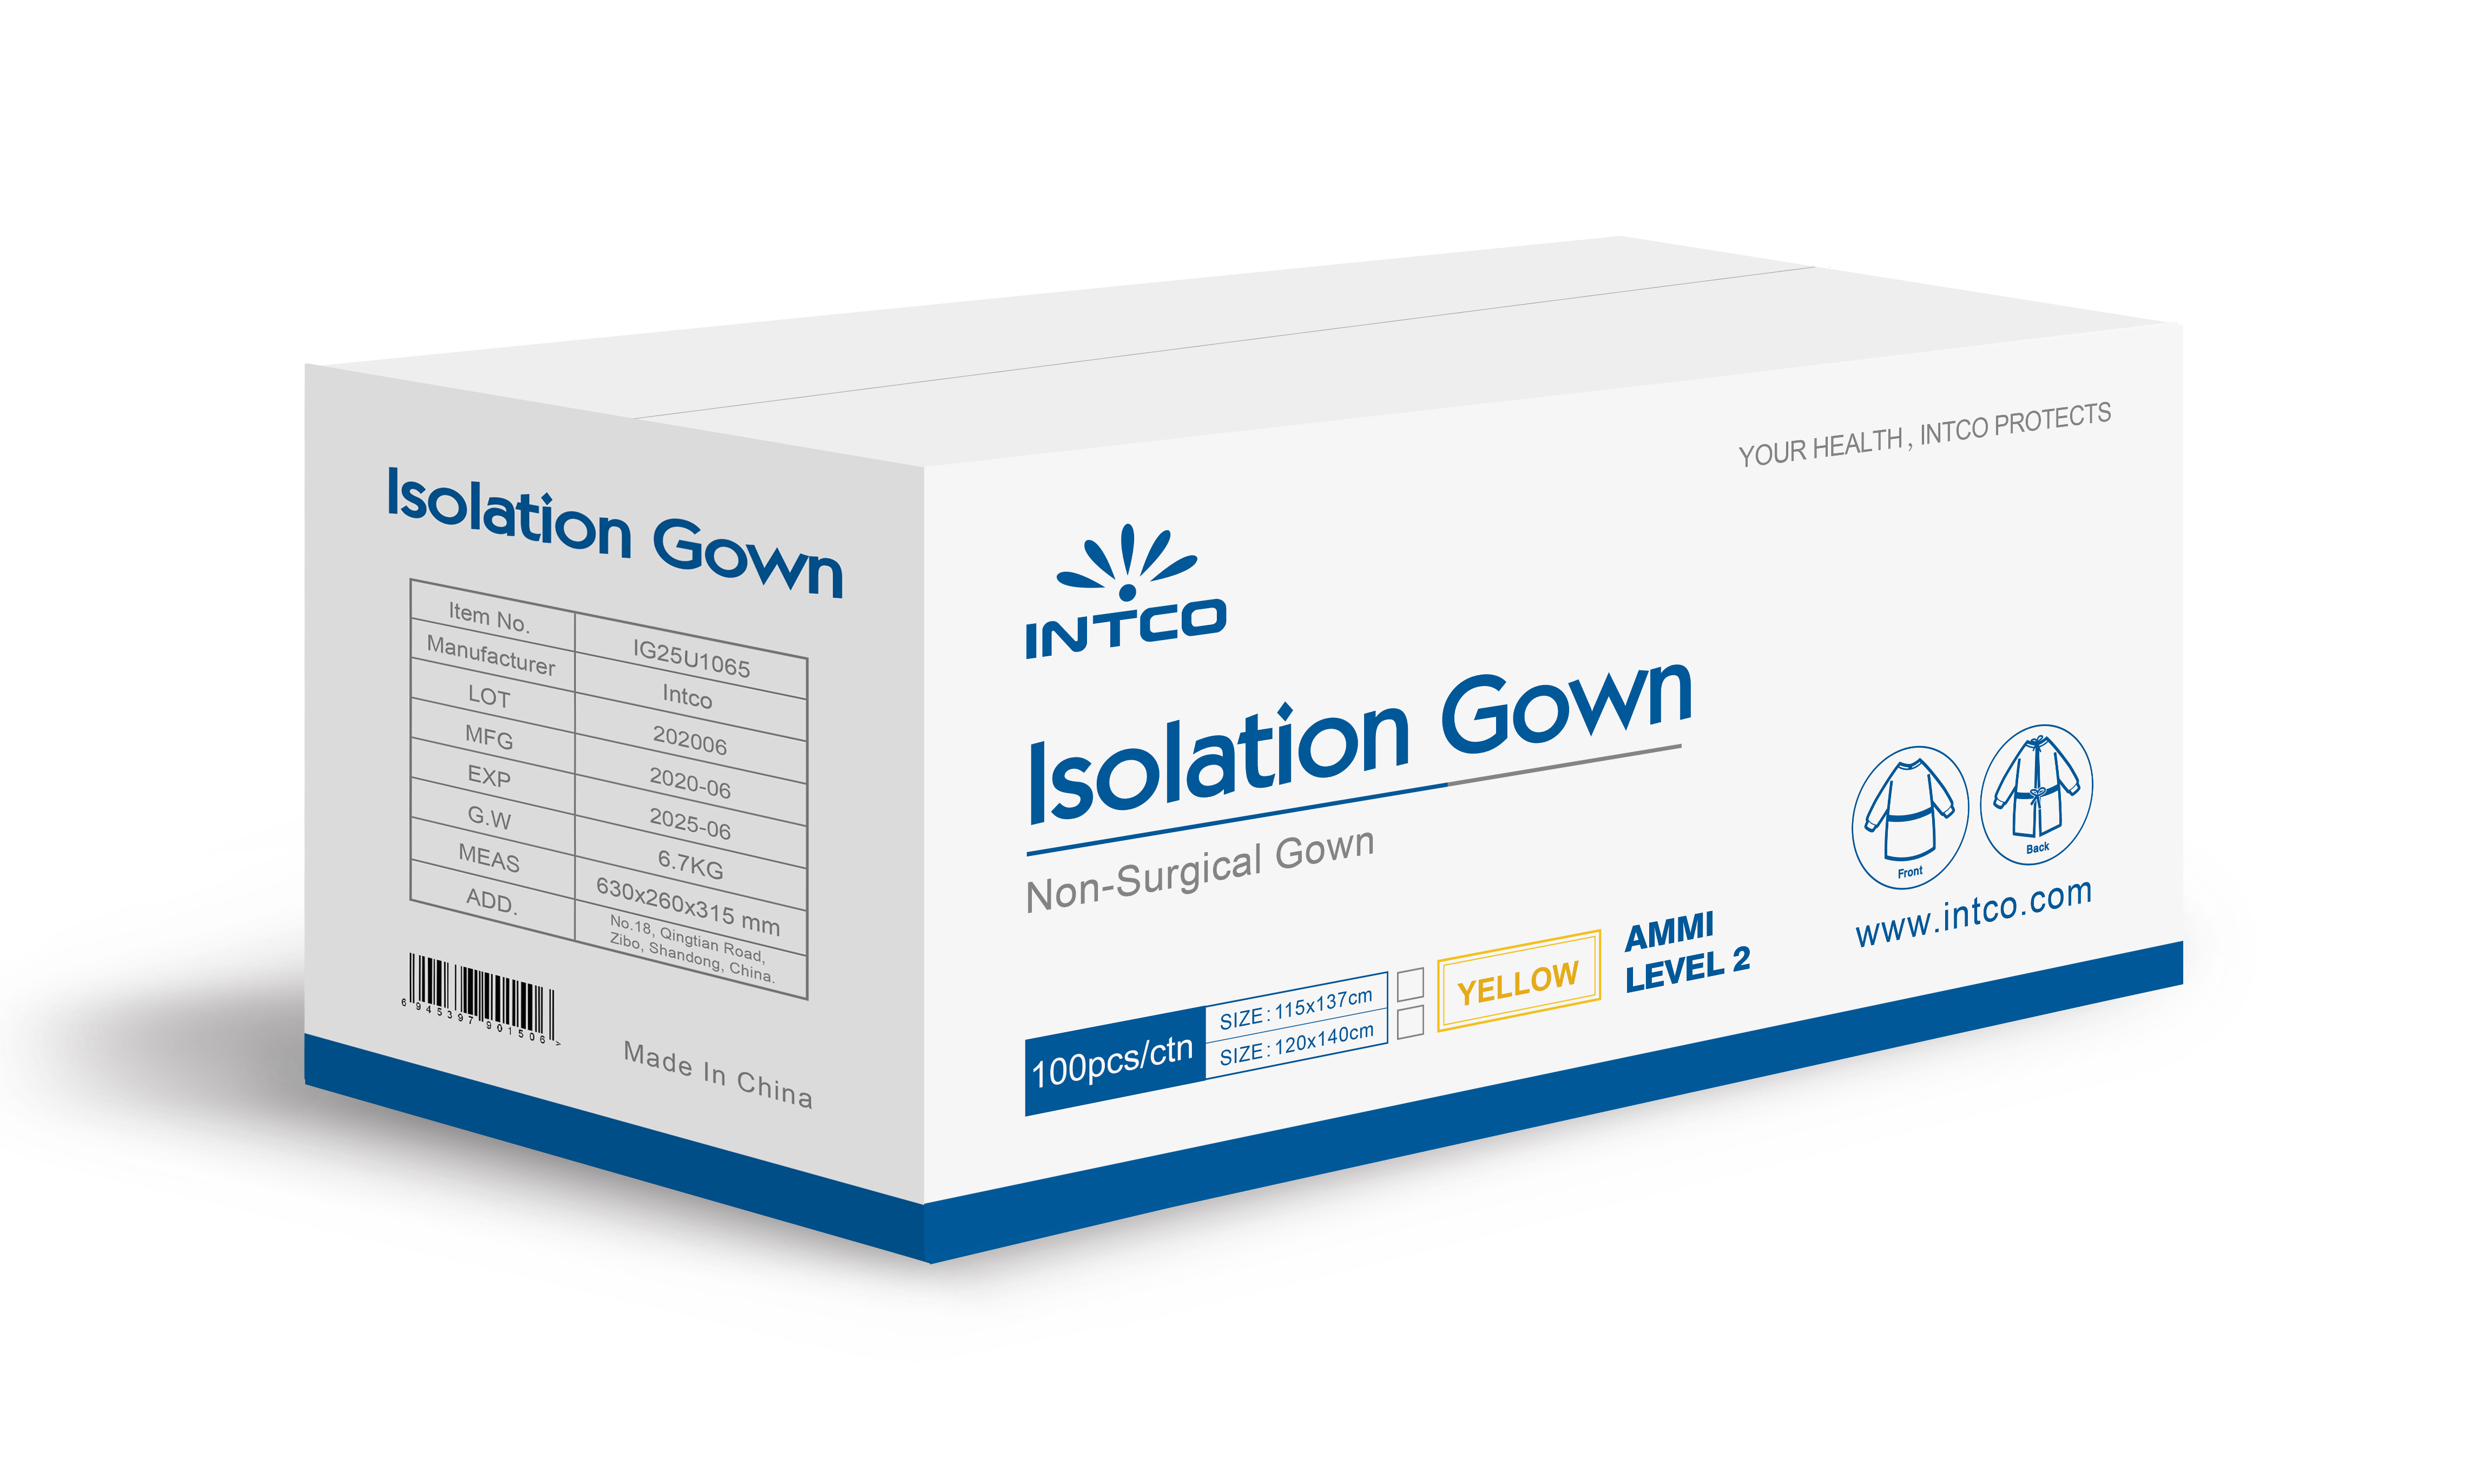 Level 2 AAMI Disposable Isolation Gown - Case of 50 - 2 colors